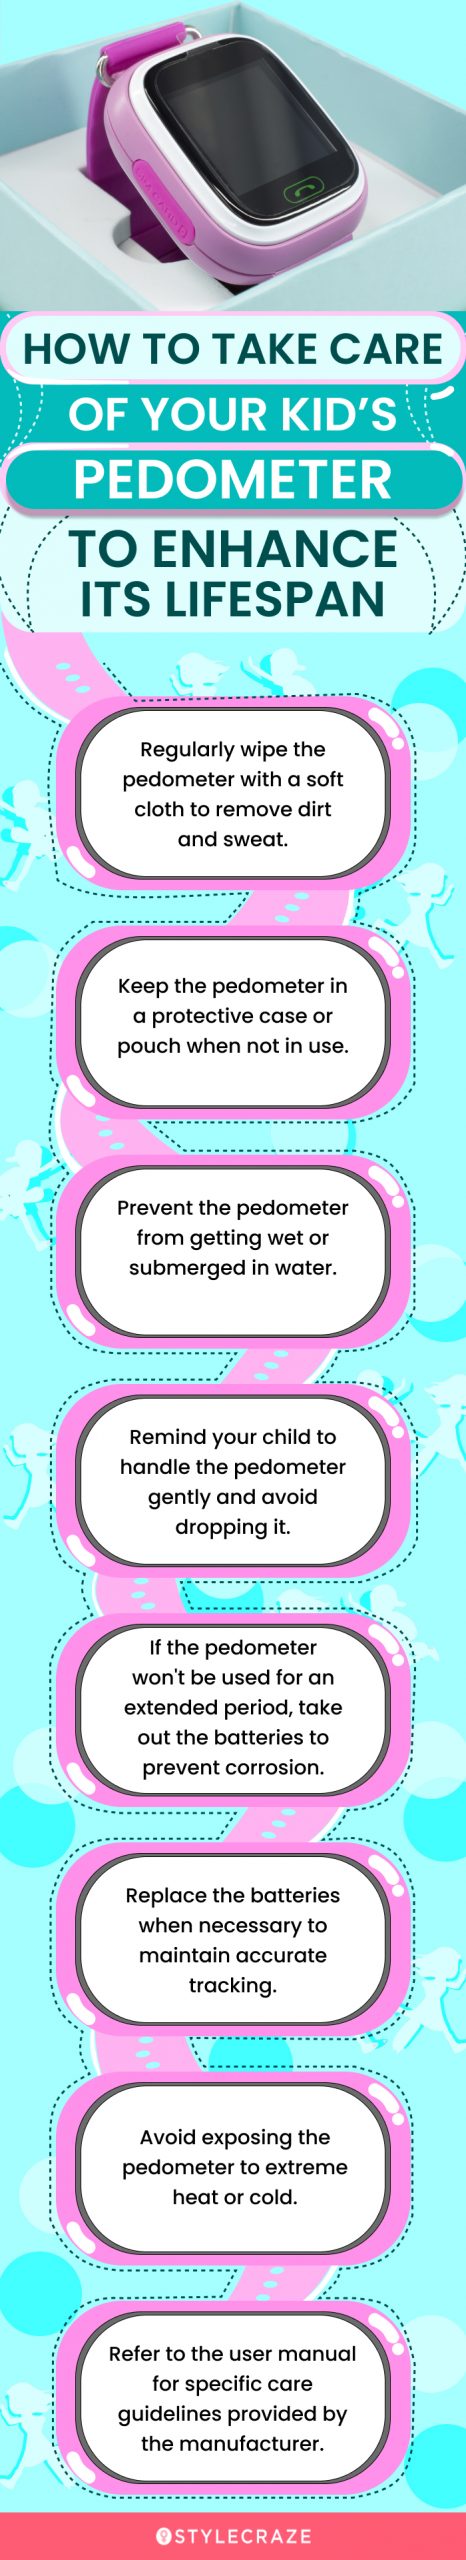 How To Take Care Of Your Kid's Pedometer (infographic)